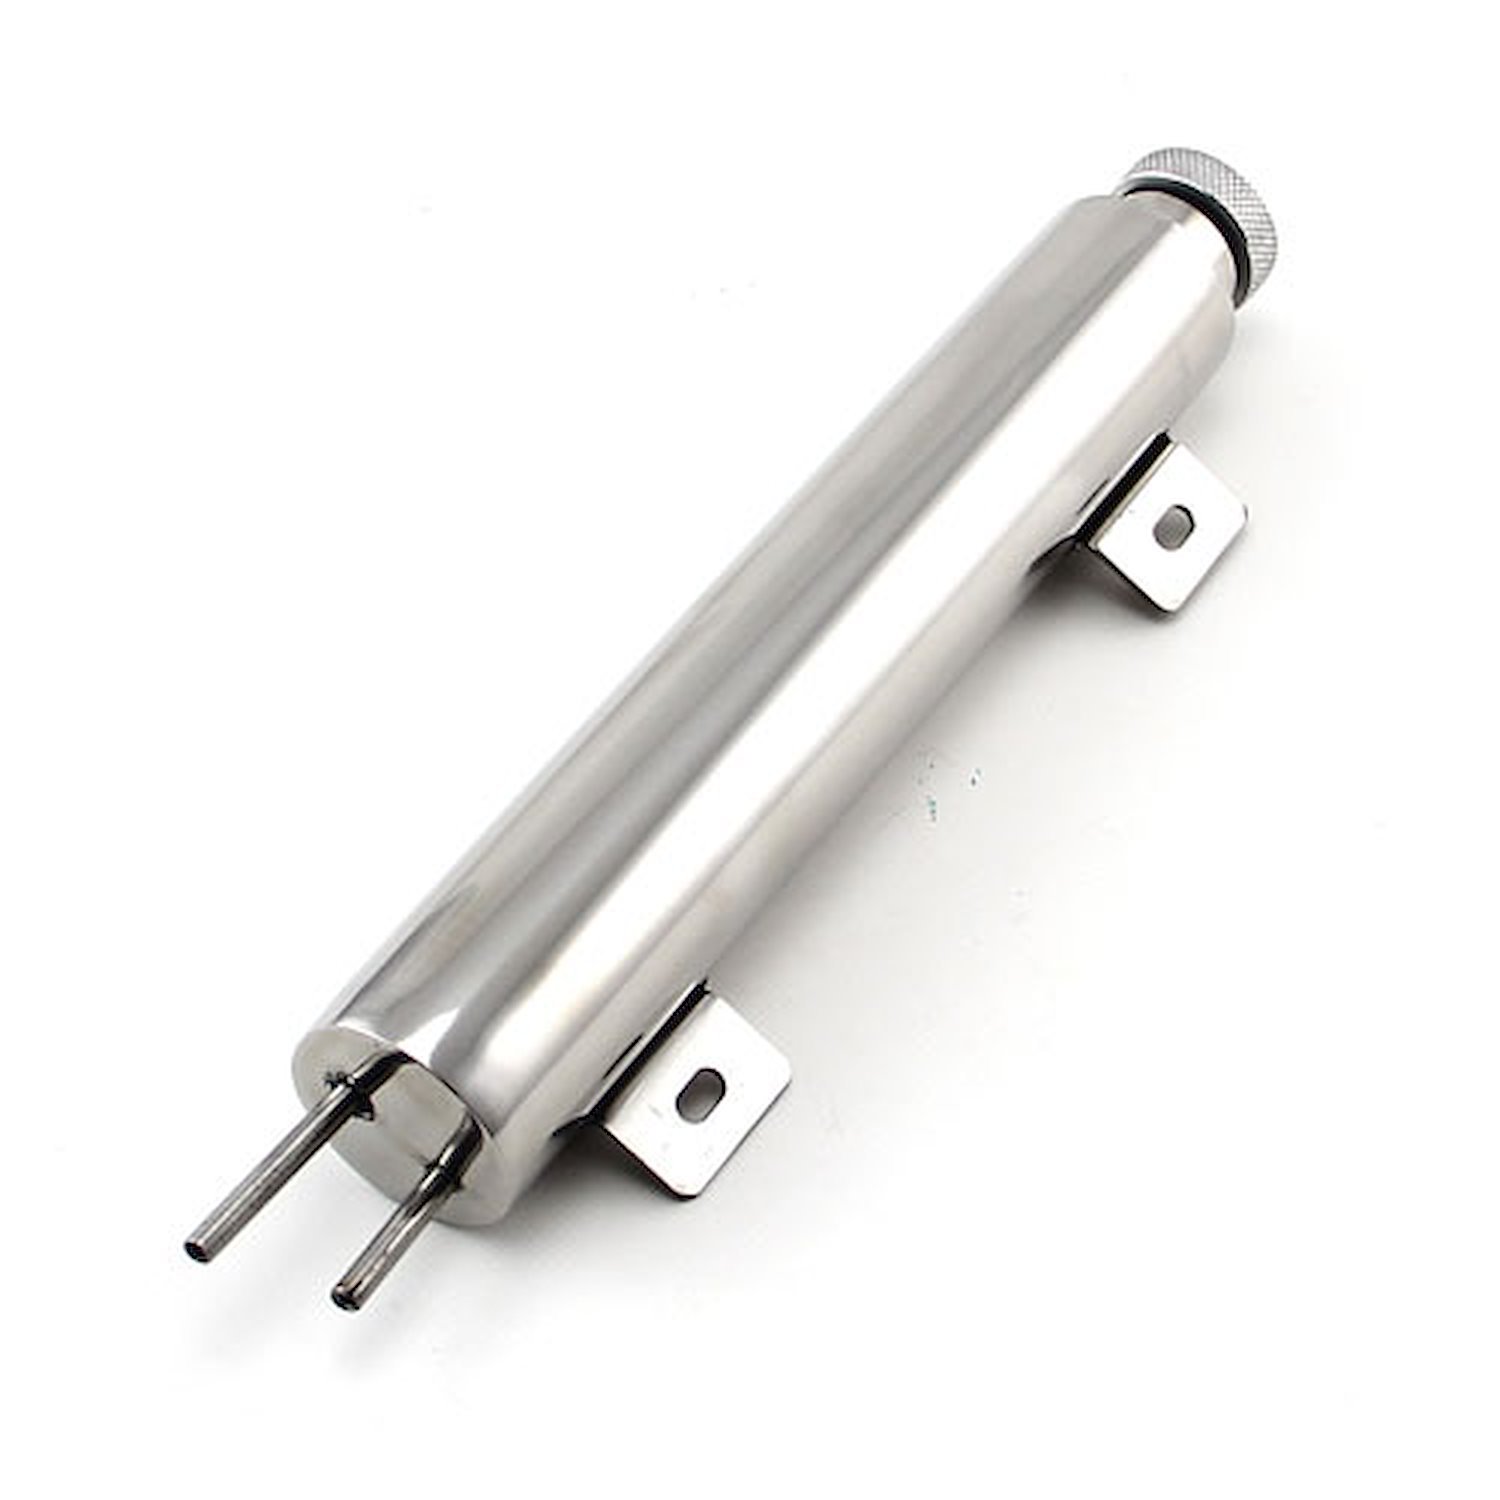 2 x 13 Stainless Steel Overflow Tank With Mounting Bracket Kit